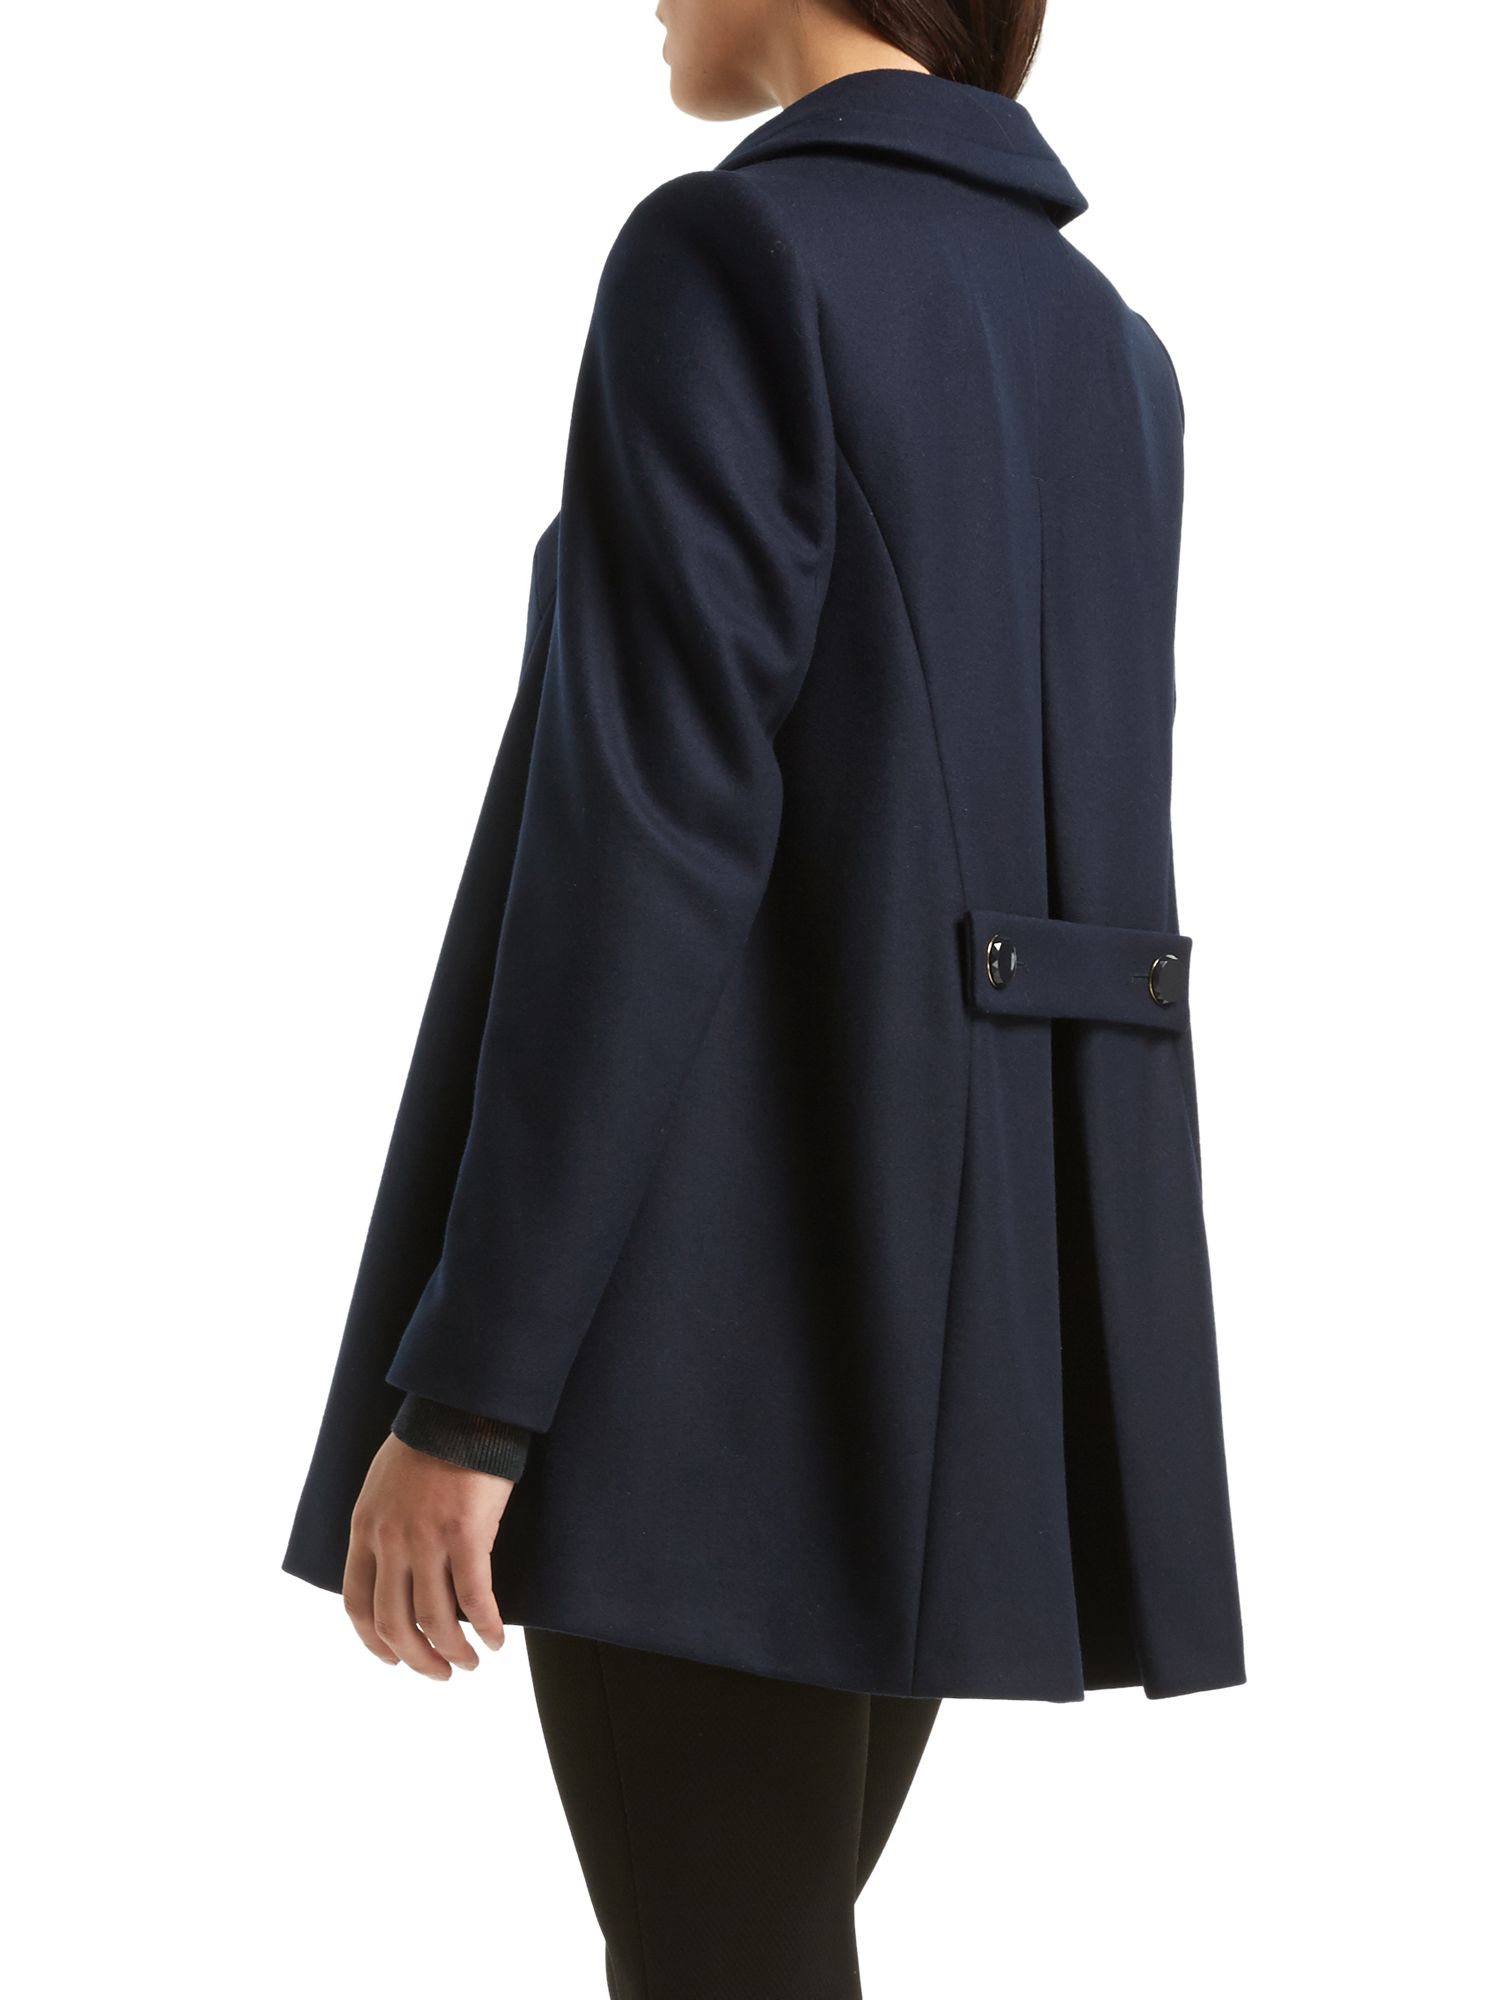 Ted Baker Alay Wool Blend Swing Coat, Navy at John Lewis & Partners